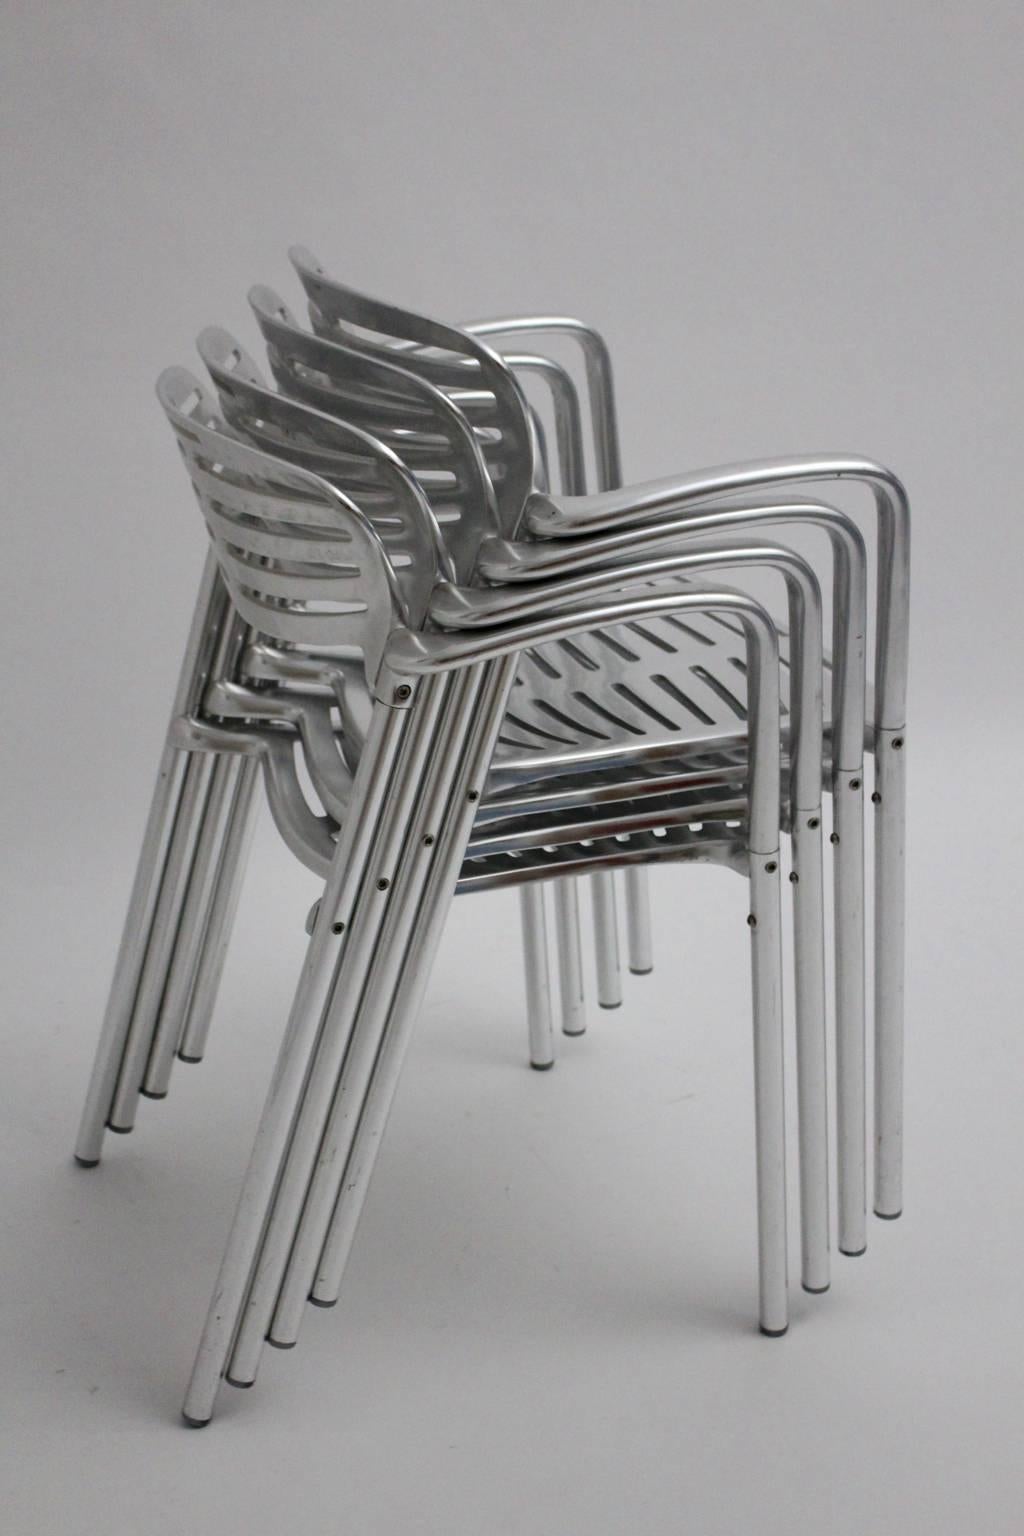 20th Century Modern Aluminum Stacking Chairs Garden Chairs Dining Chairs Jorge Pensi 1980s For Sale